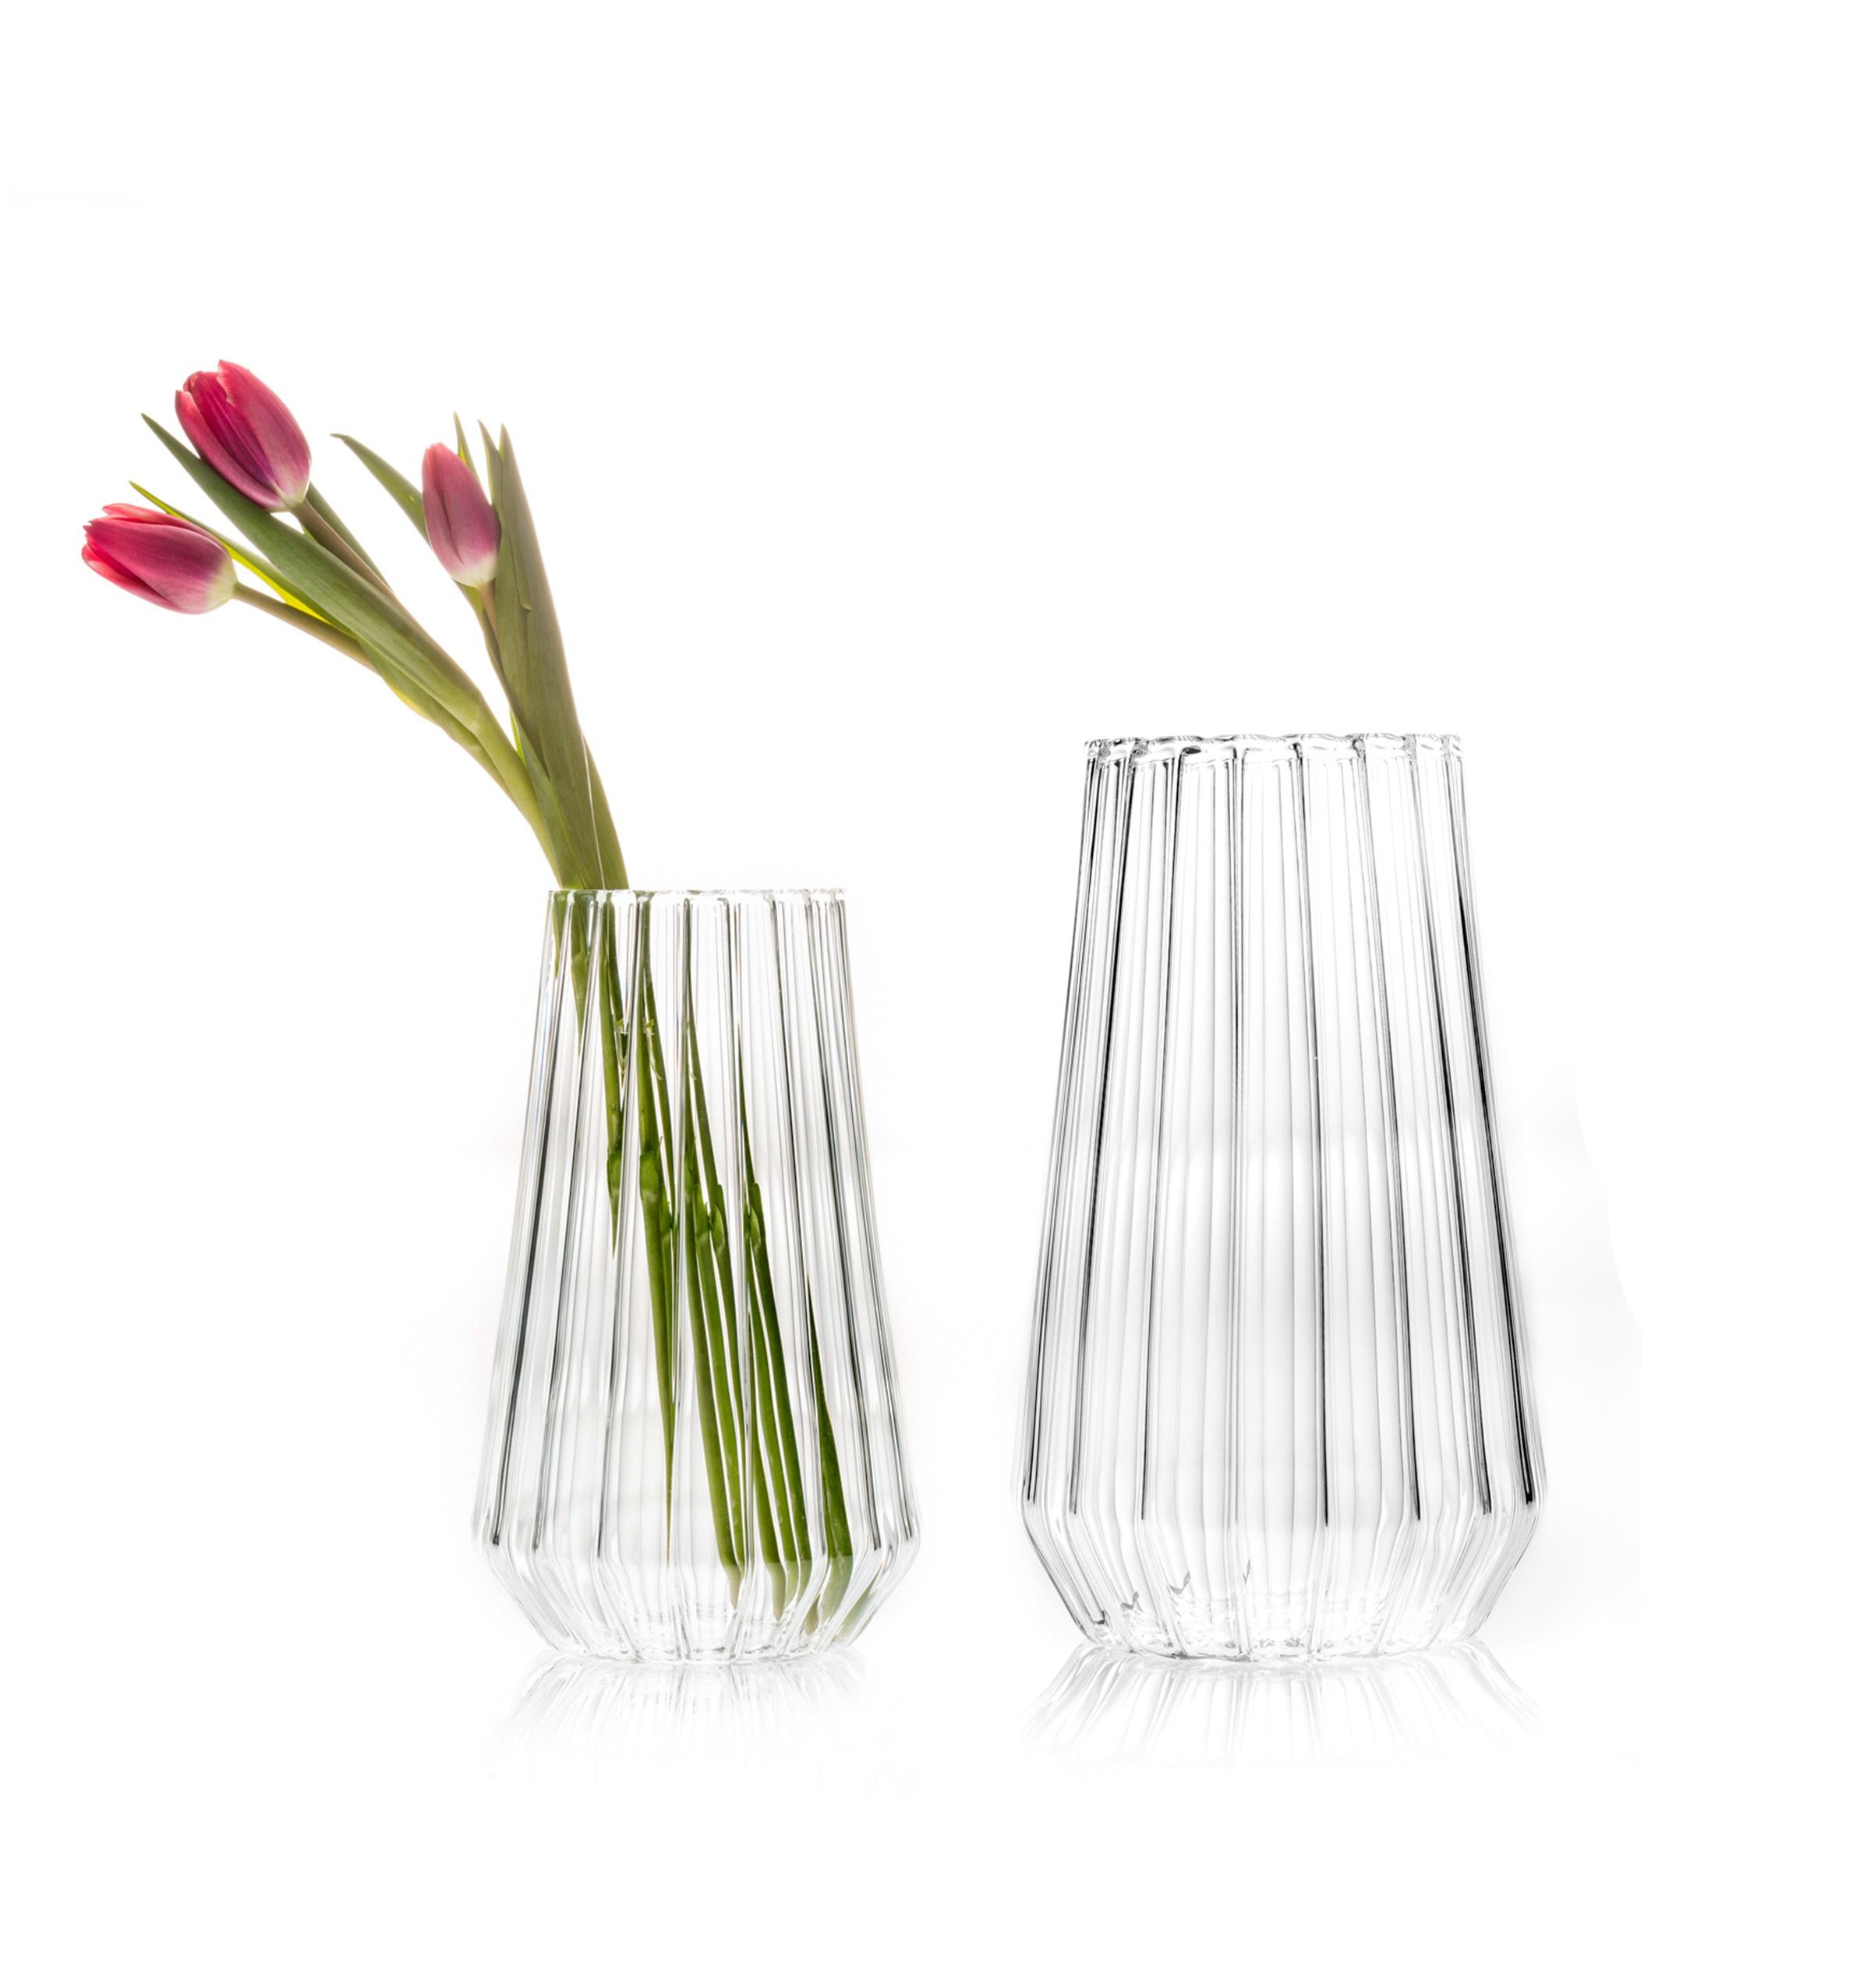 Stella Vases Large & Medium - set of 2

Pure in form, the lenticular effect of the fluted glass masks the stems and showcases the flower heads. The facet near the bottom serves as a marker for the water line and keeps
the visual effect of the vase